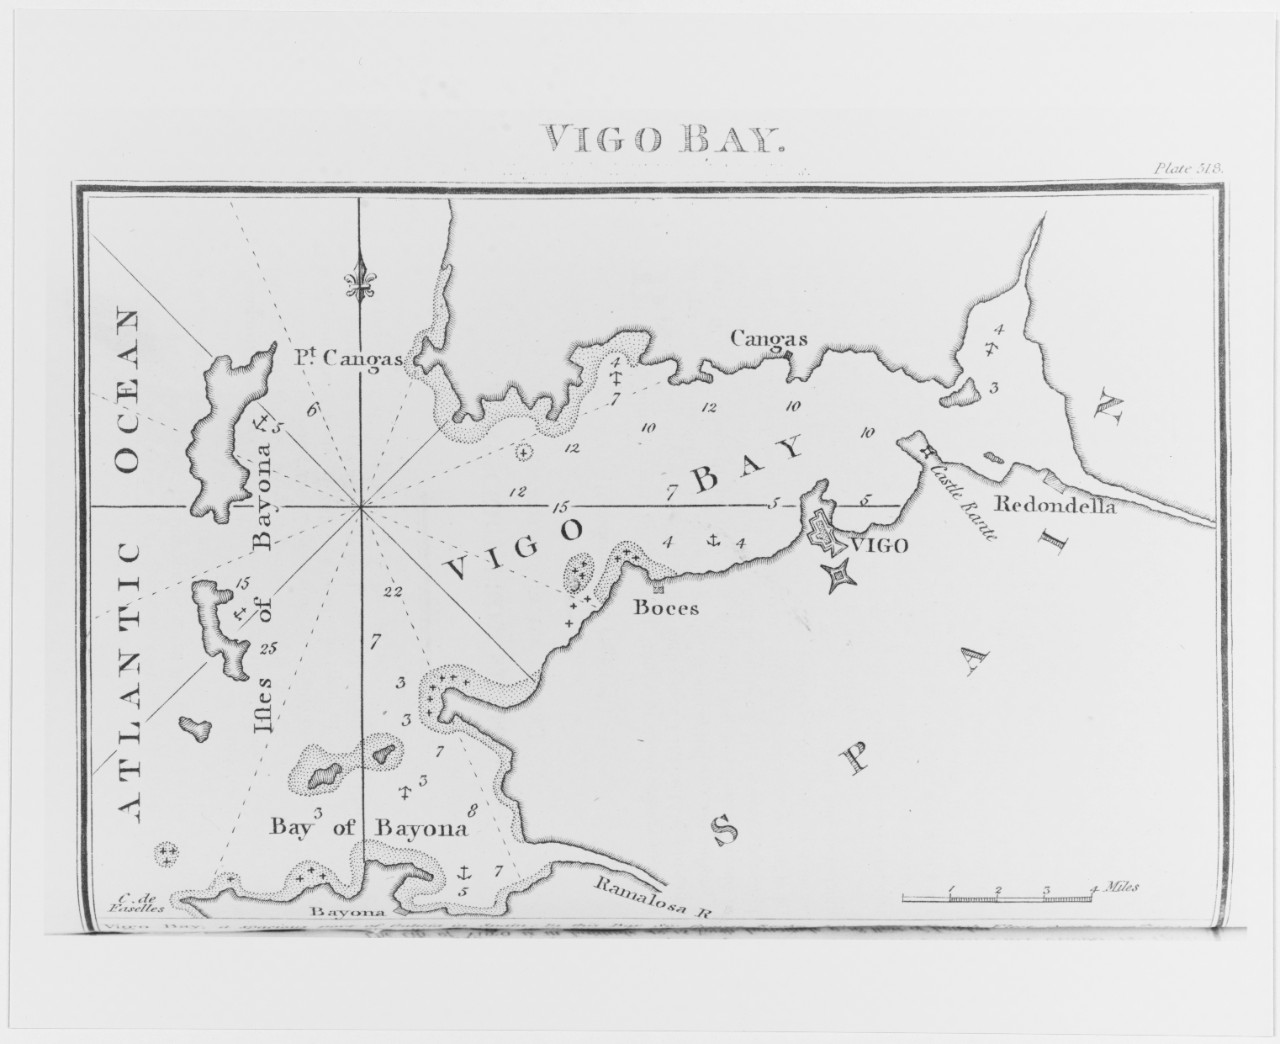 Vigo Bay, Spain. Chart published in the Naval Chronicle, London, 1818